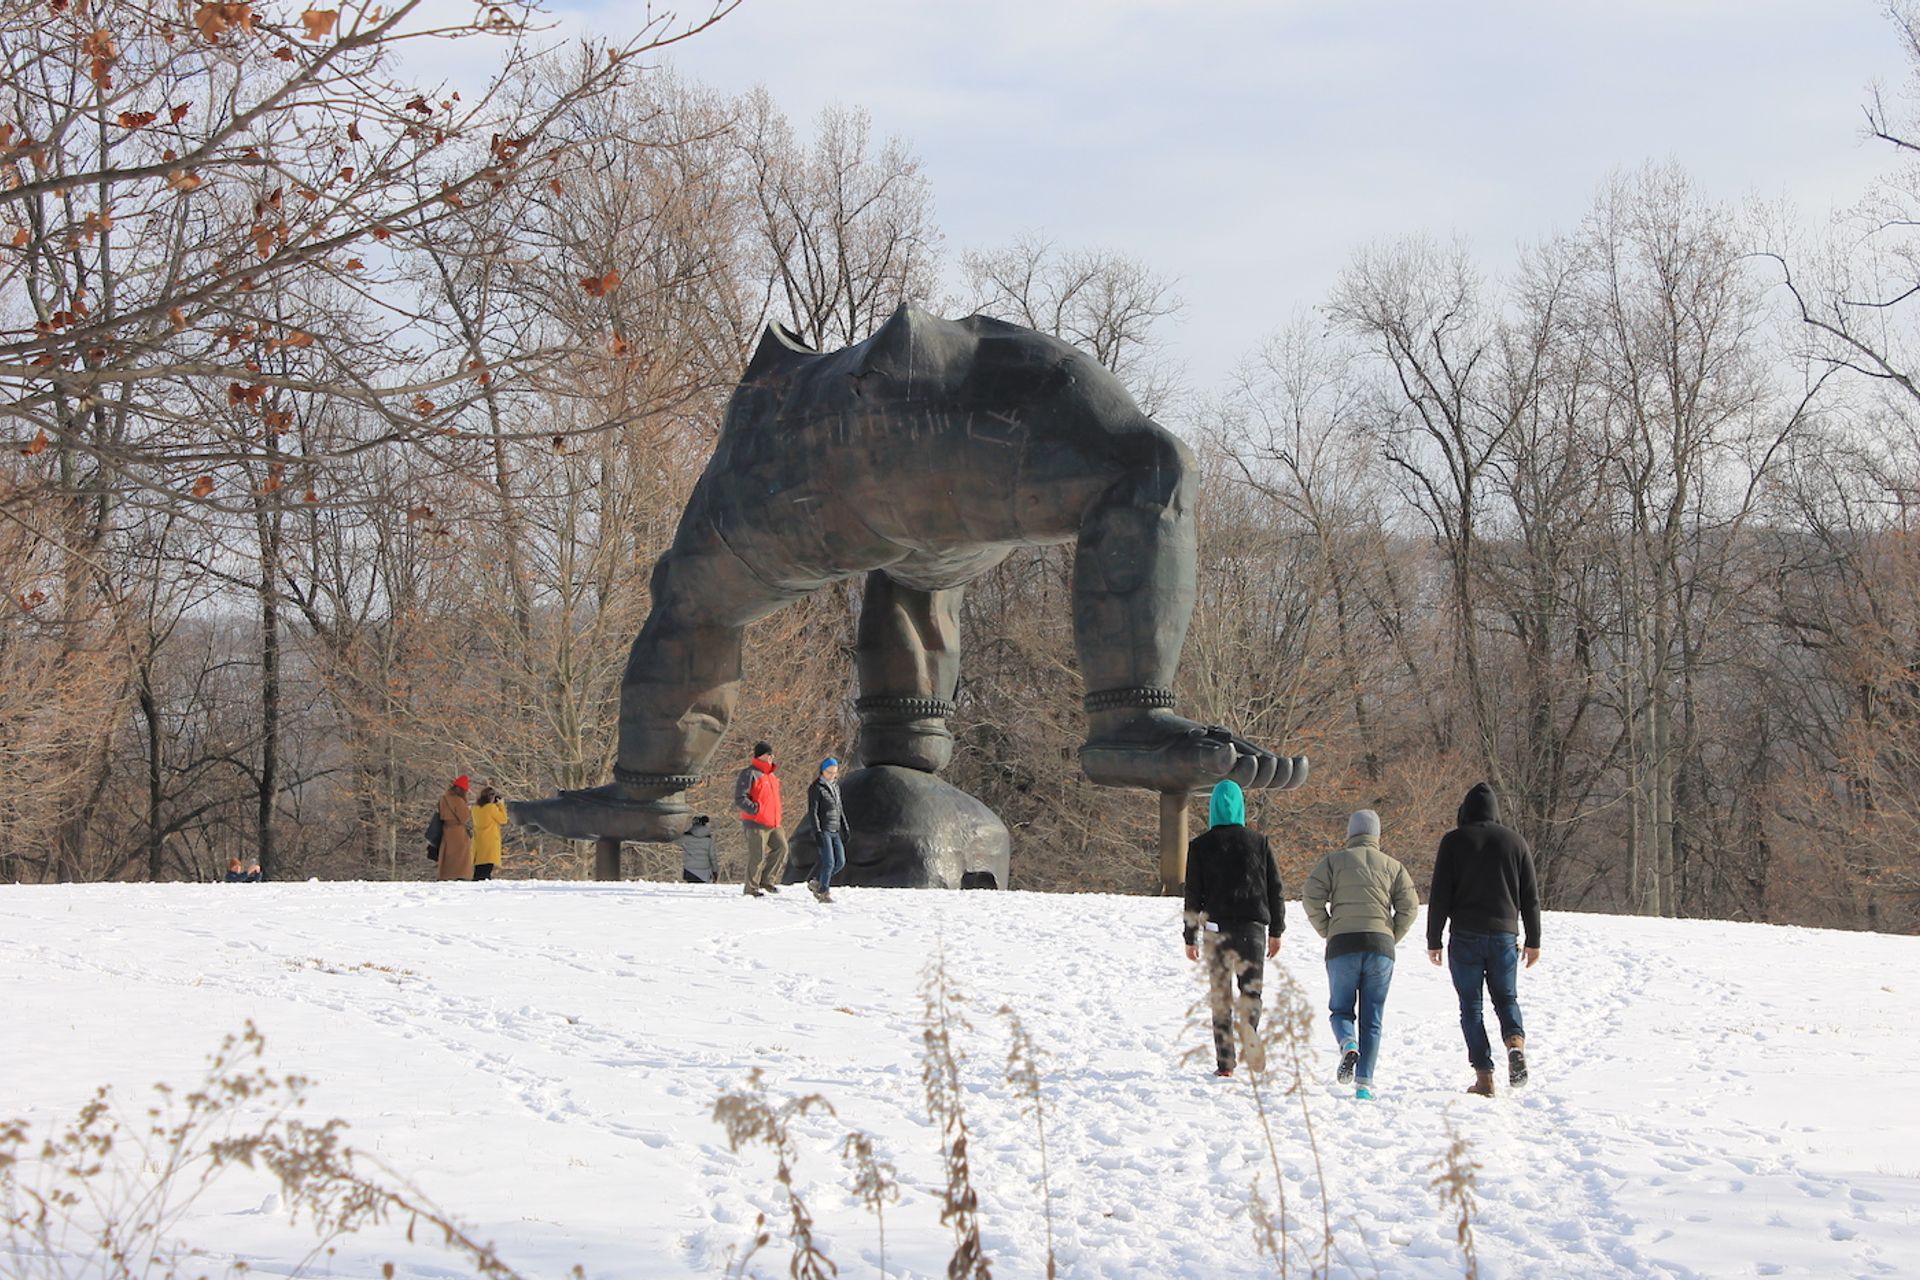 Zhang Huan's steel and copper Three Legged Buddha (2007) is one of the works that can withstand the winter season at Storm King Storm King Art Center